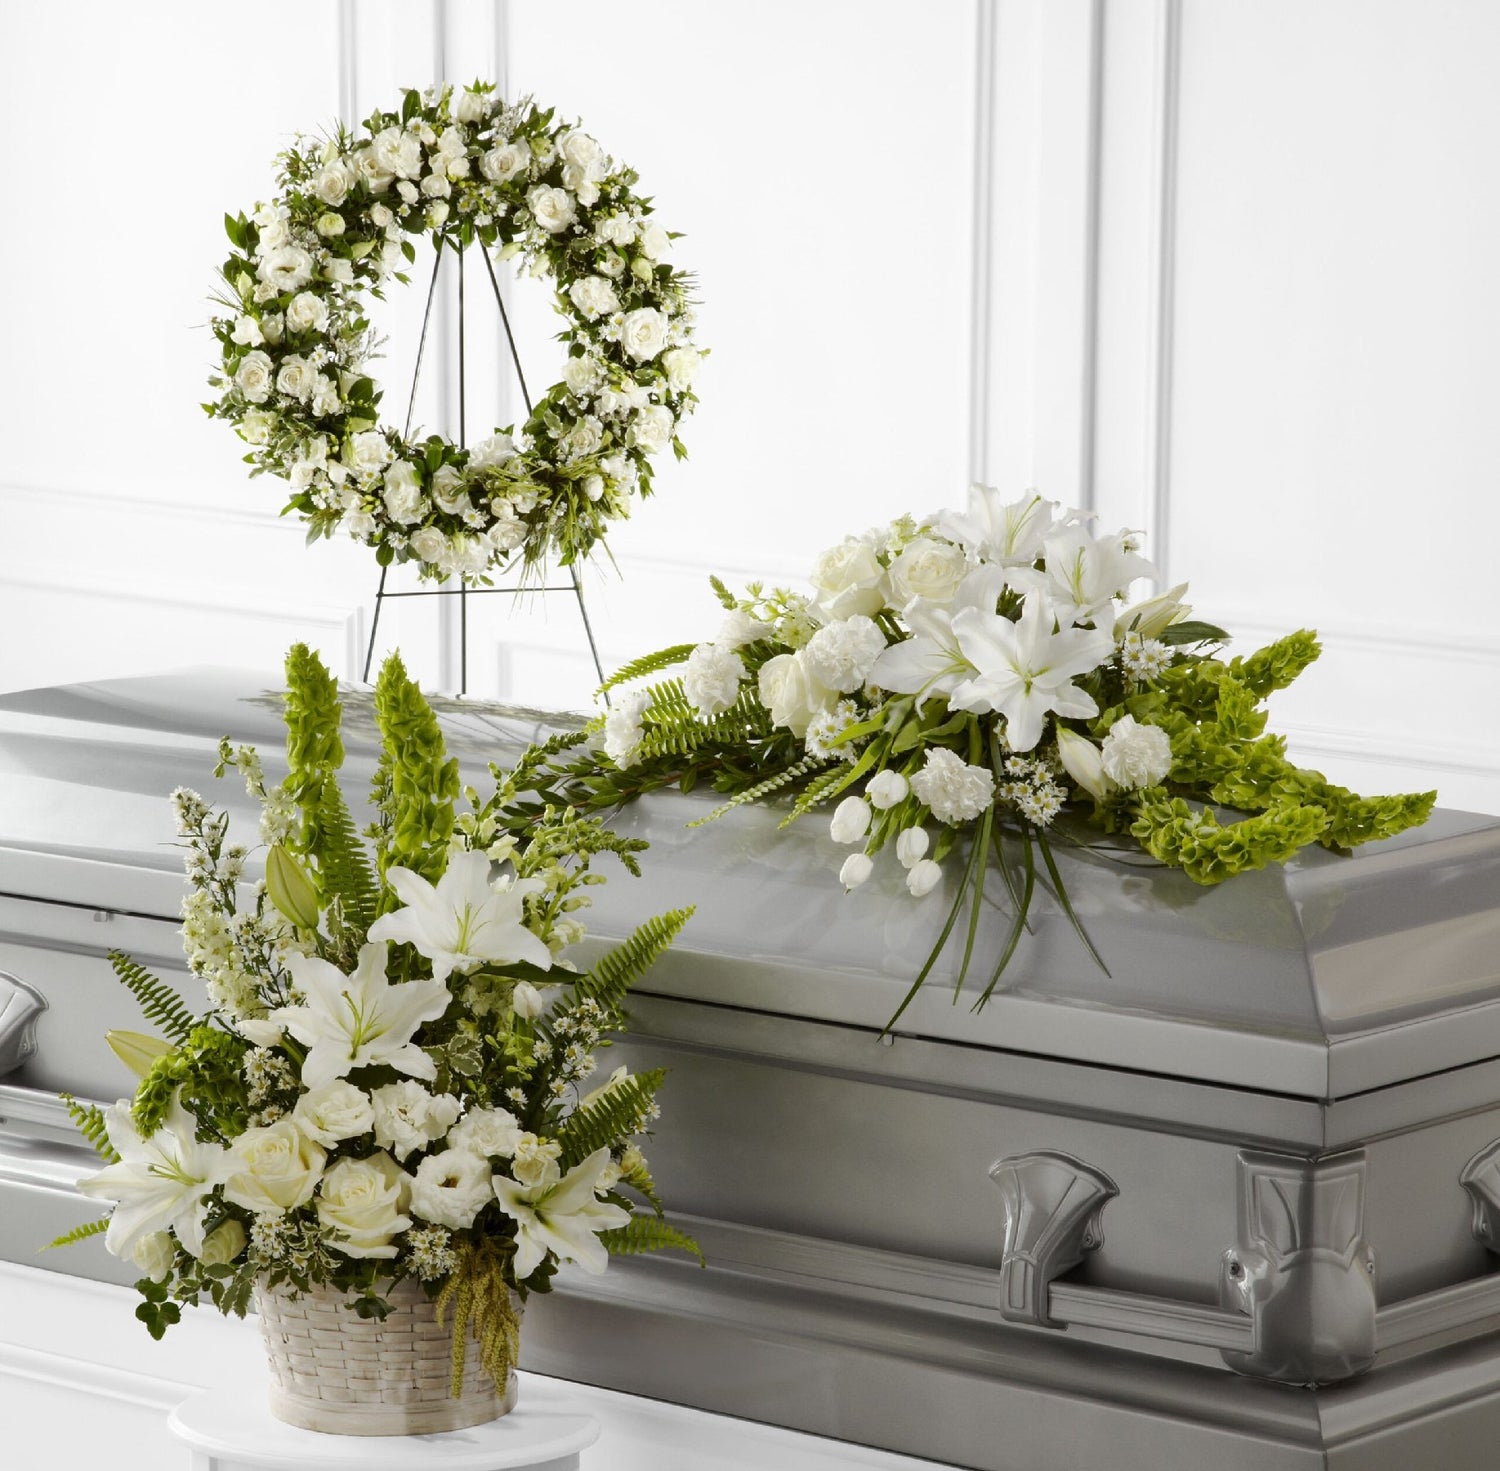 Funeral Fruit & Floral Baskets - Flower Delivery NYC